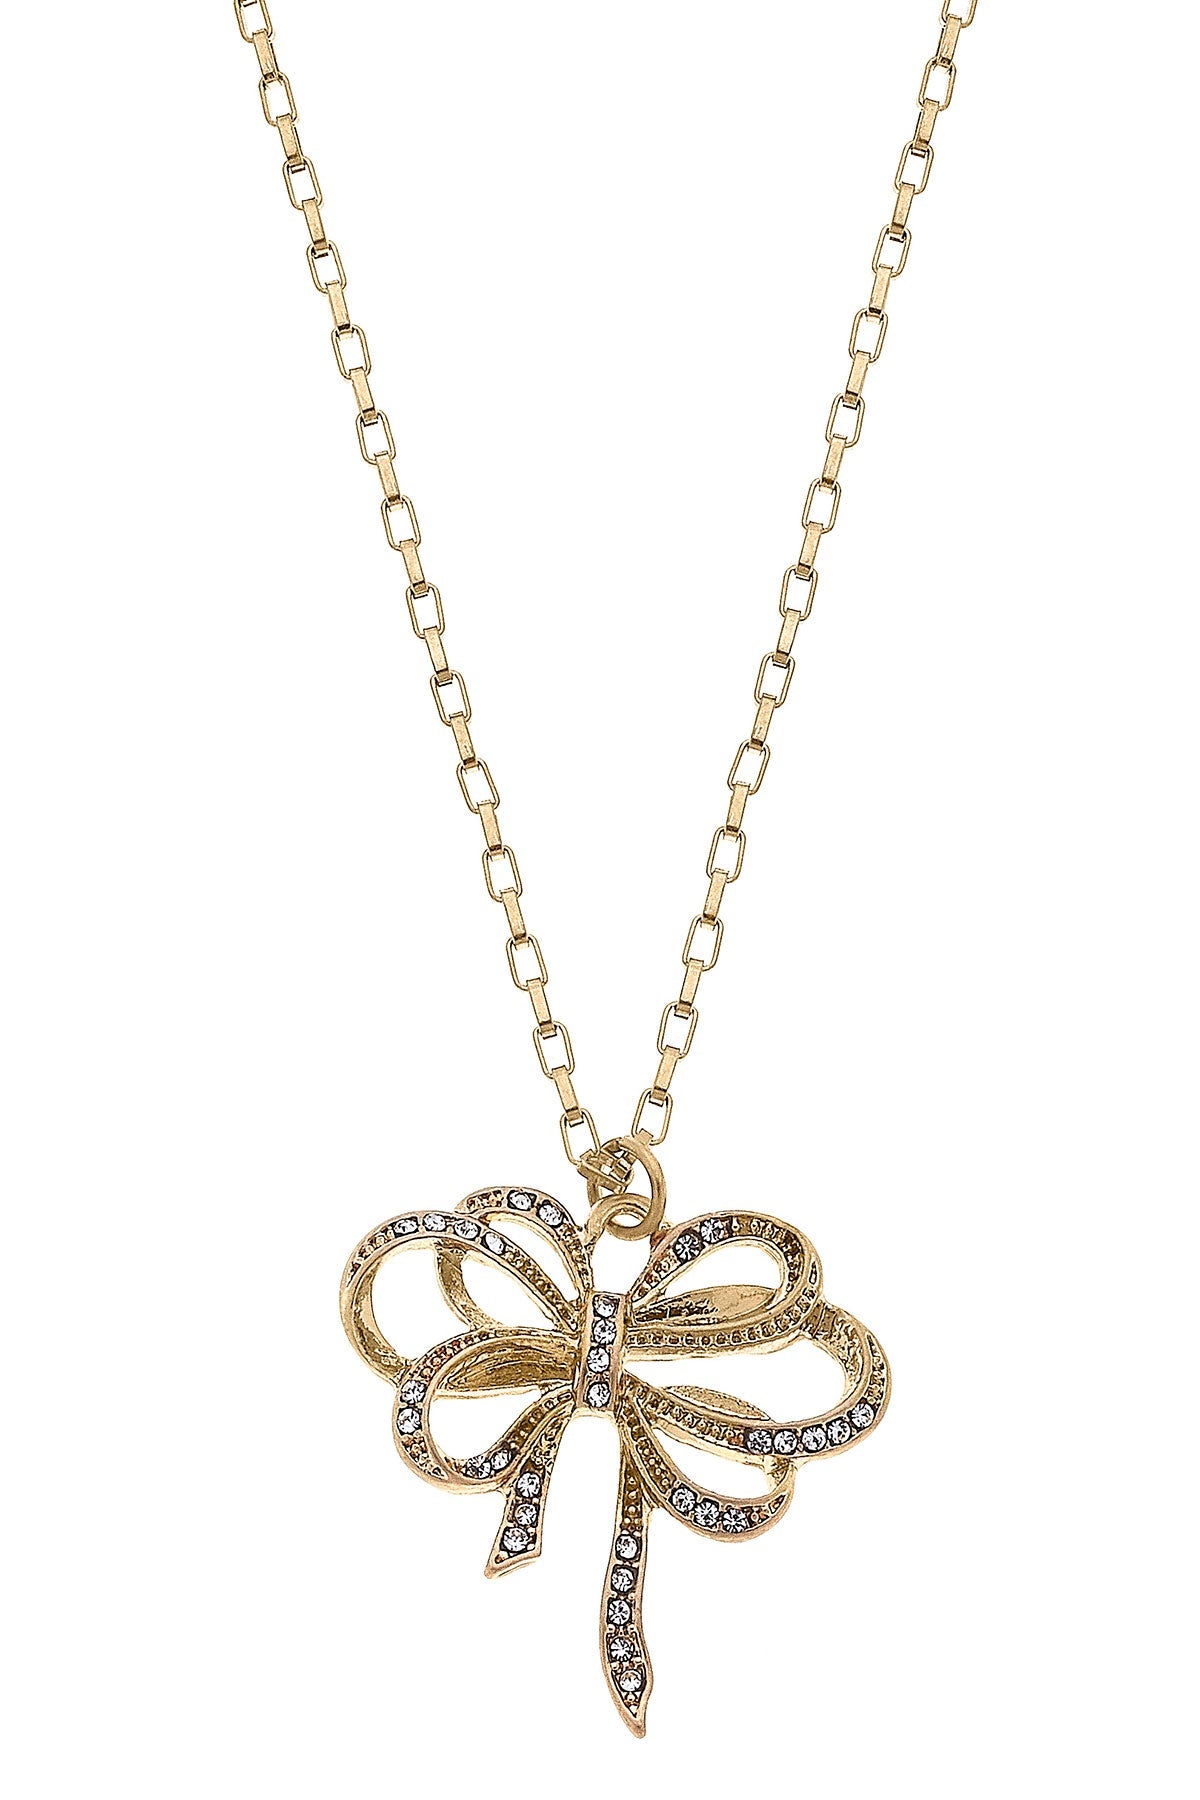 Carina PavÃ© Bow Pendant Necklace in Worn Gold